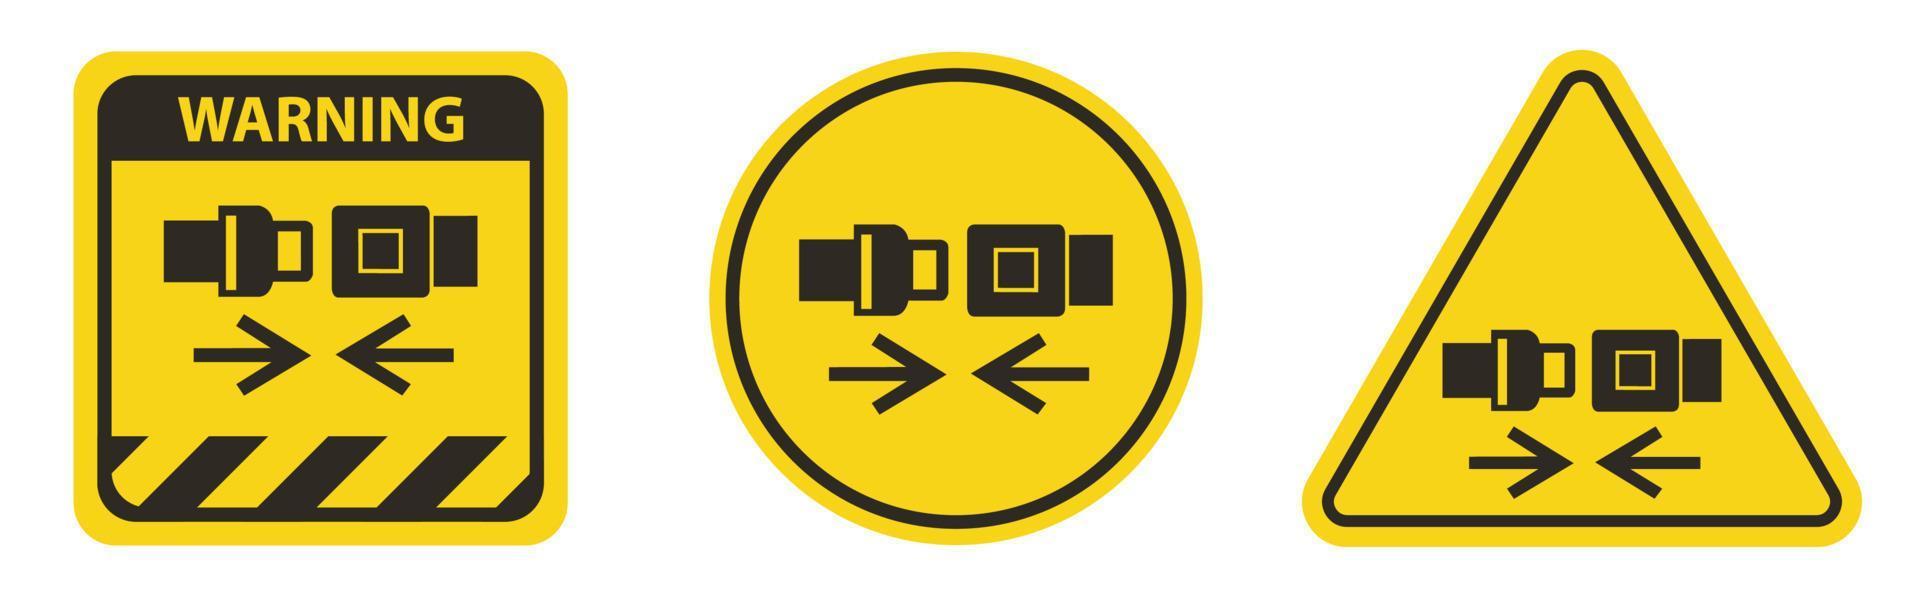 Caution Wear Safety Belt Symbol Sign Isolate On White Background vector